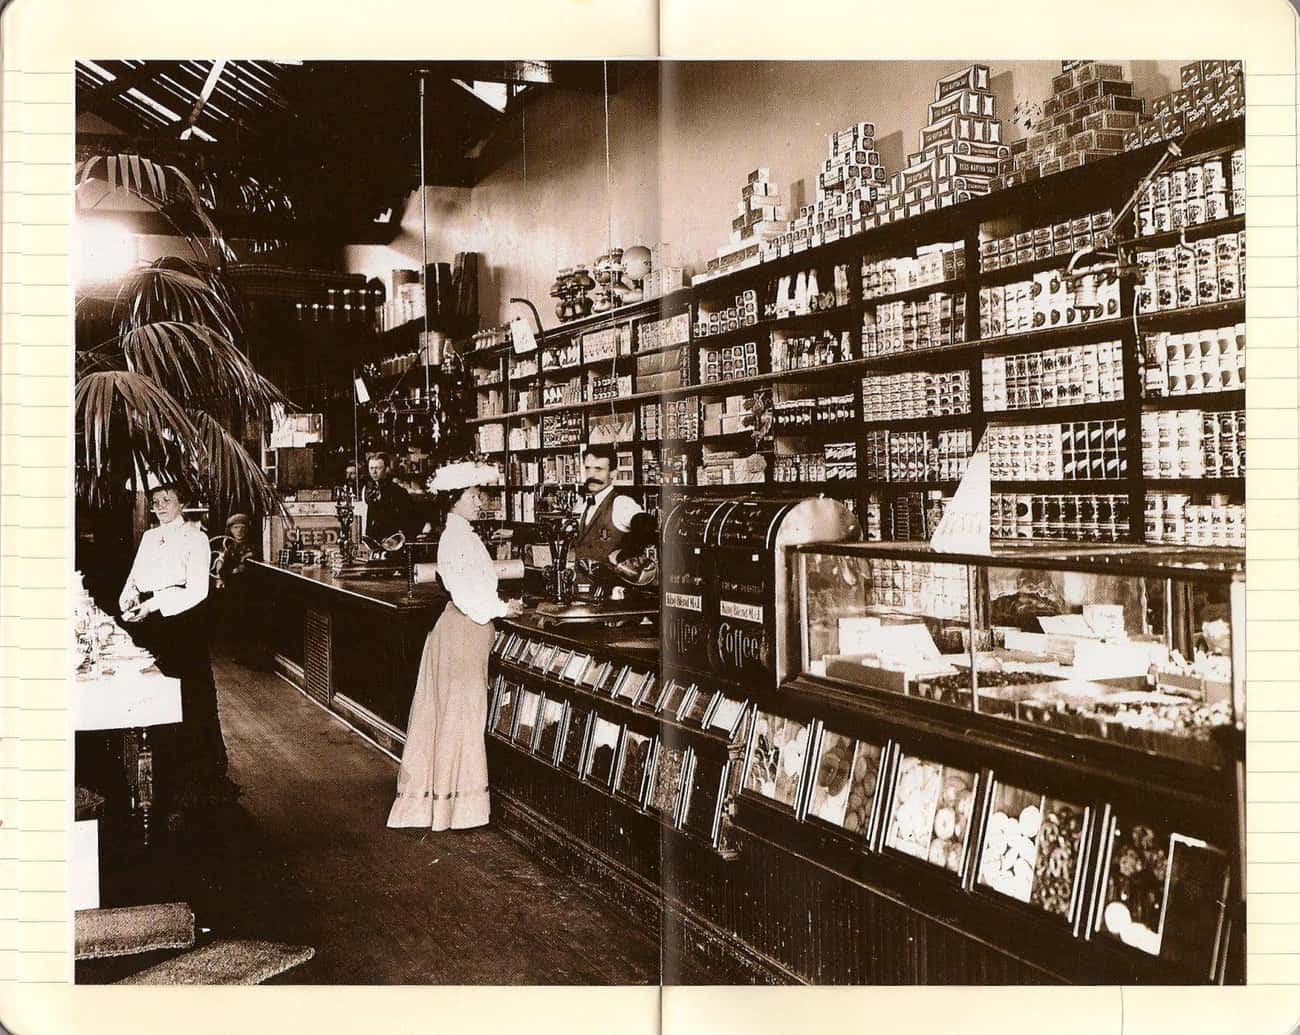 American Grocery Store, Late 19th Century